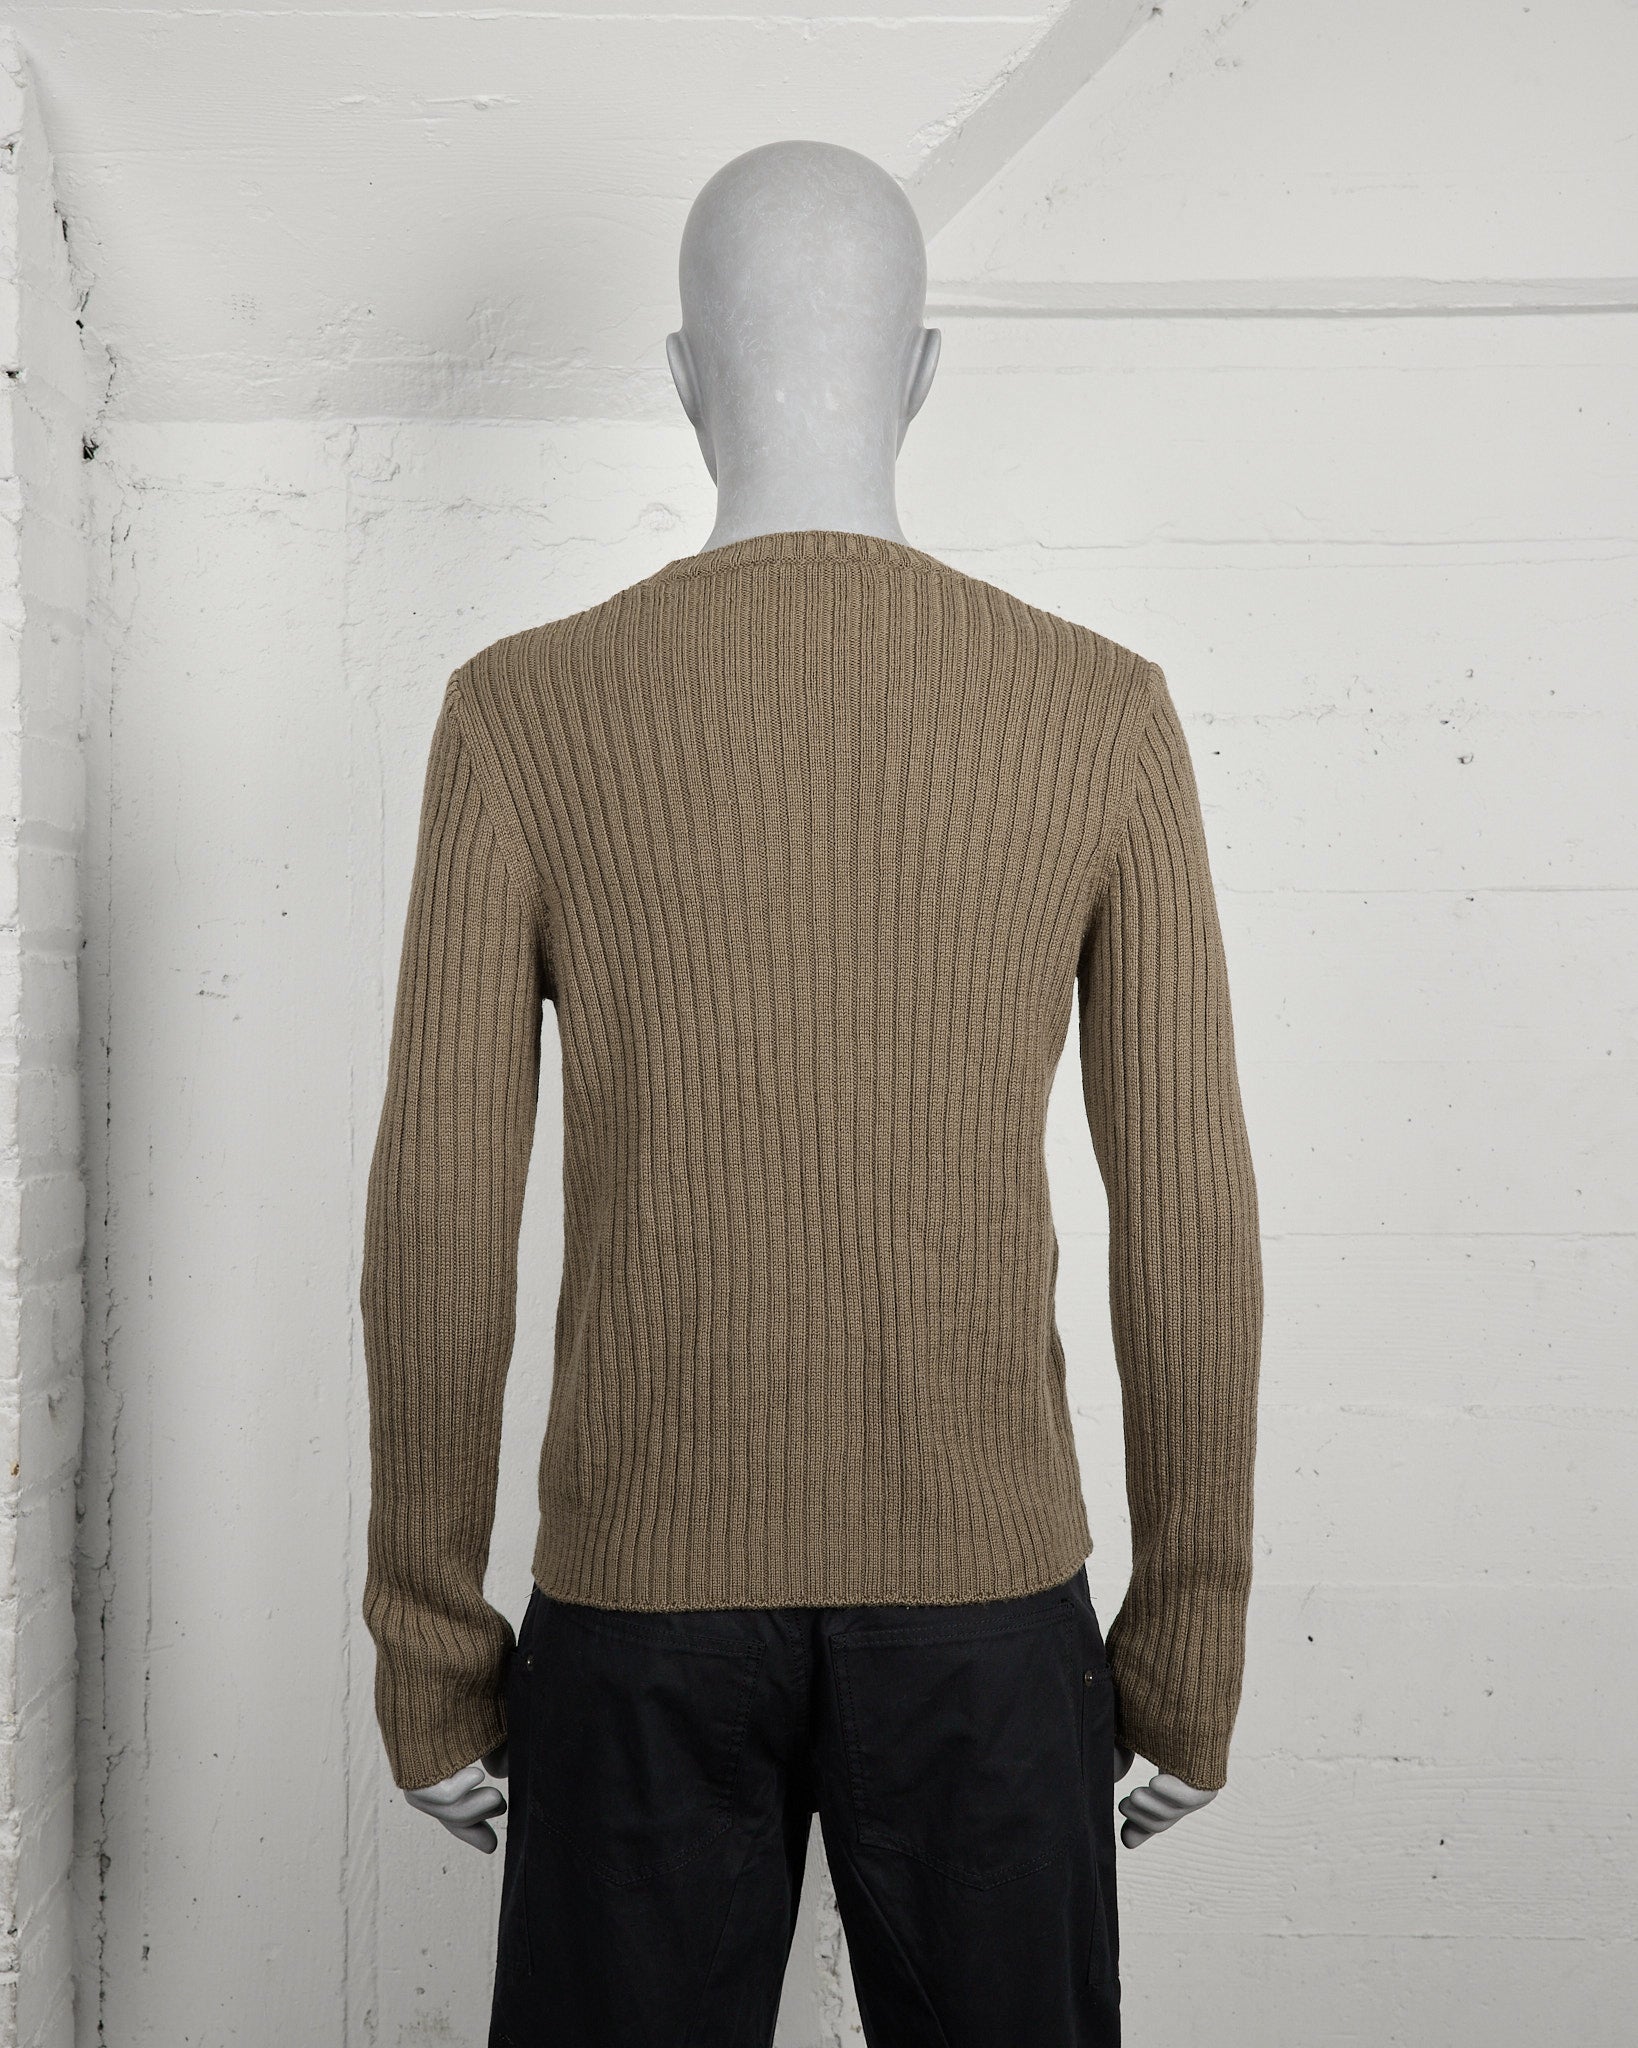 Helmut Lang Light Brown Ribbed Wool Knit Sweater - AW98 - SILVER 